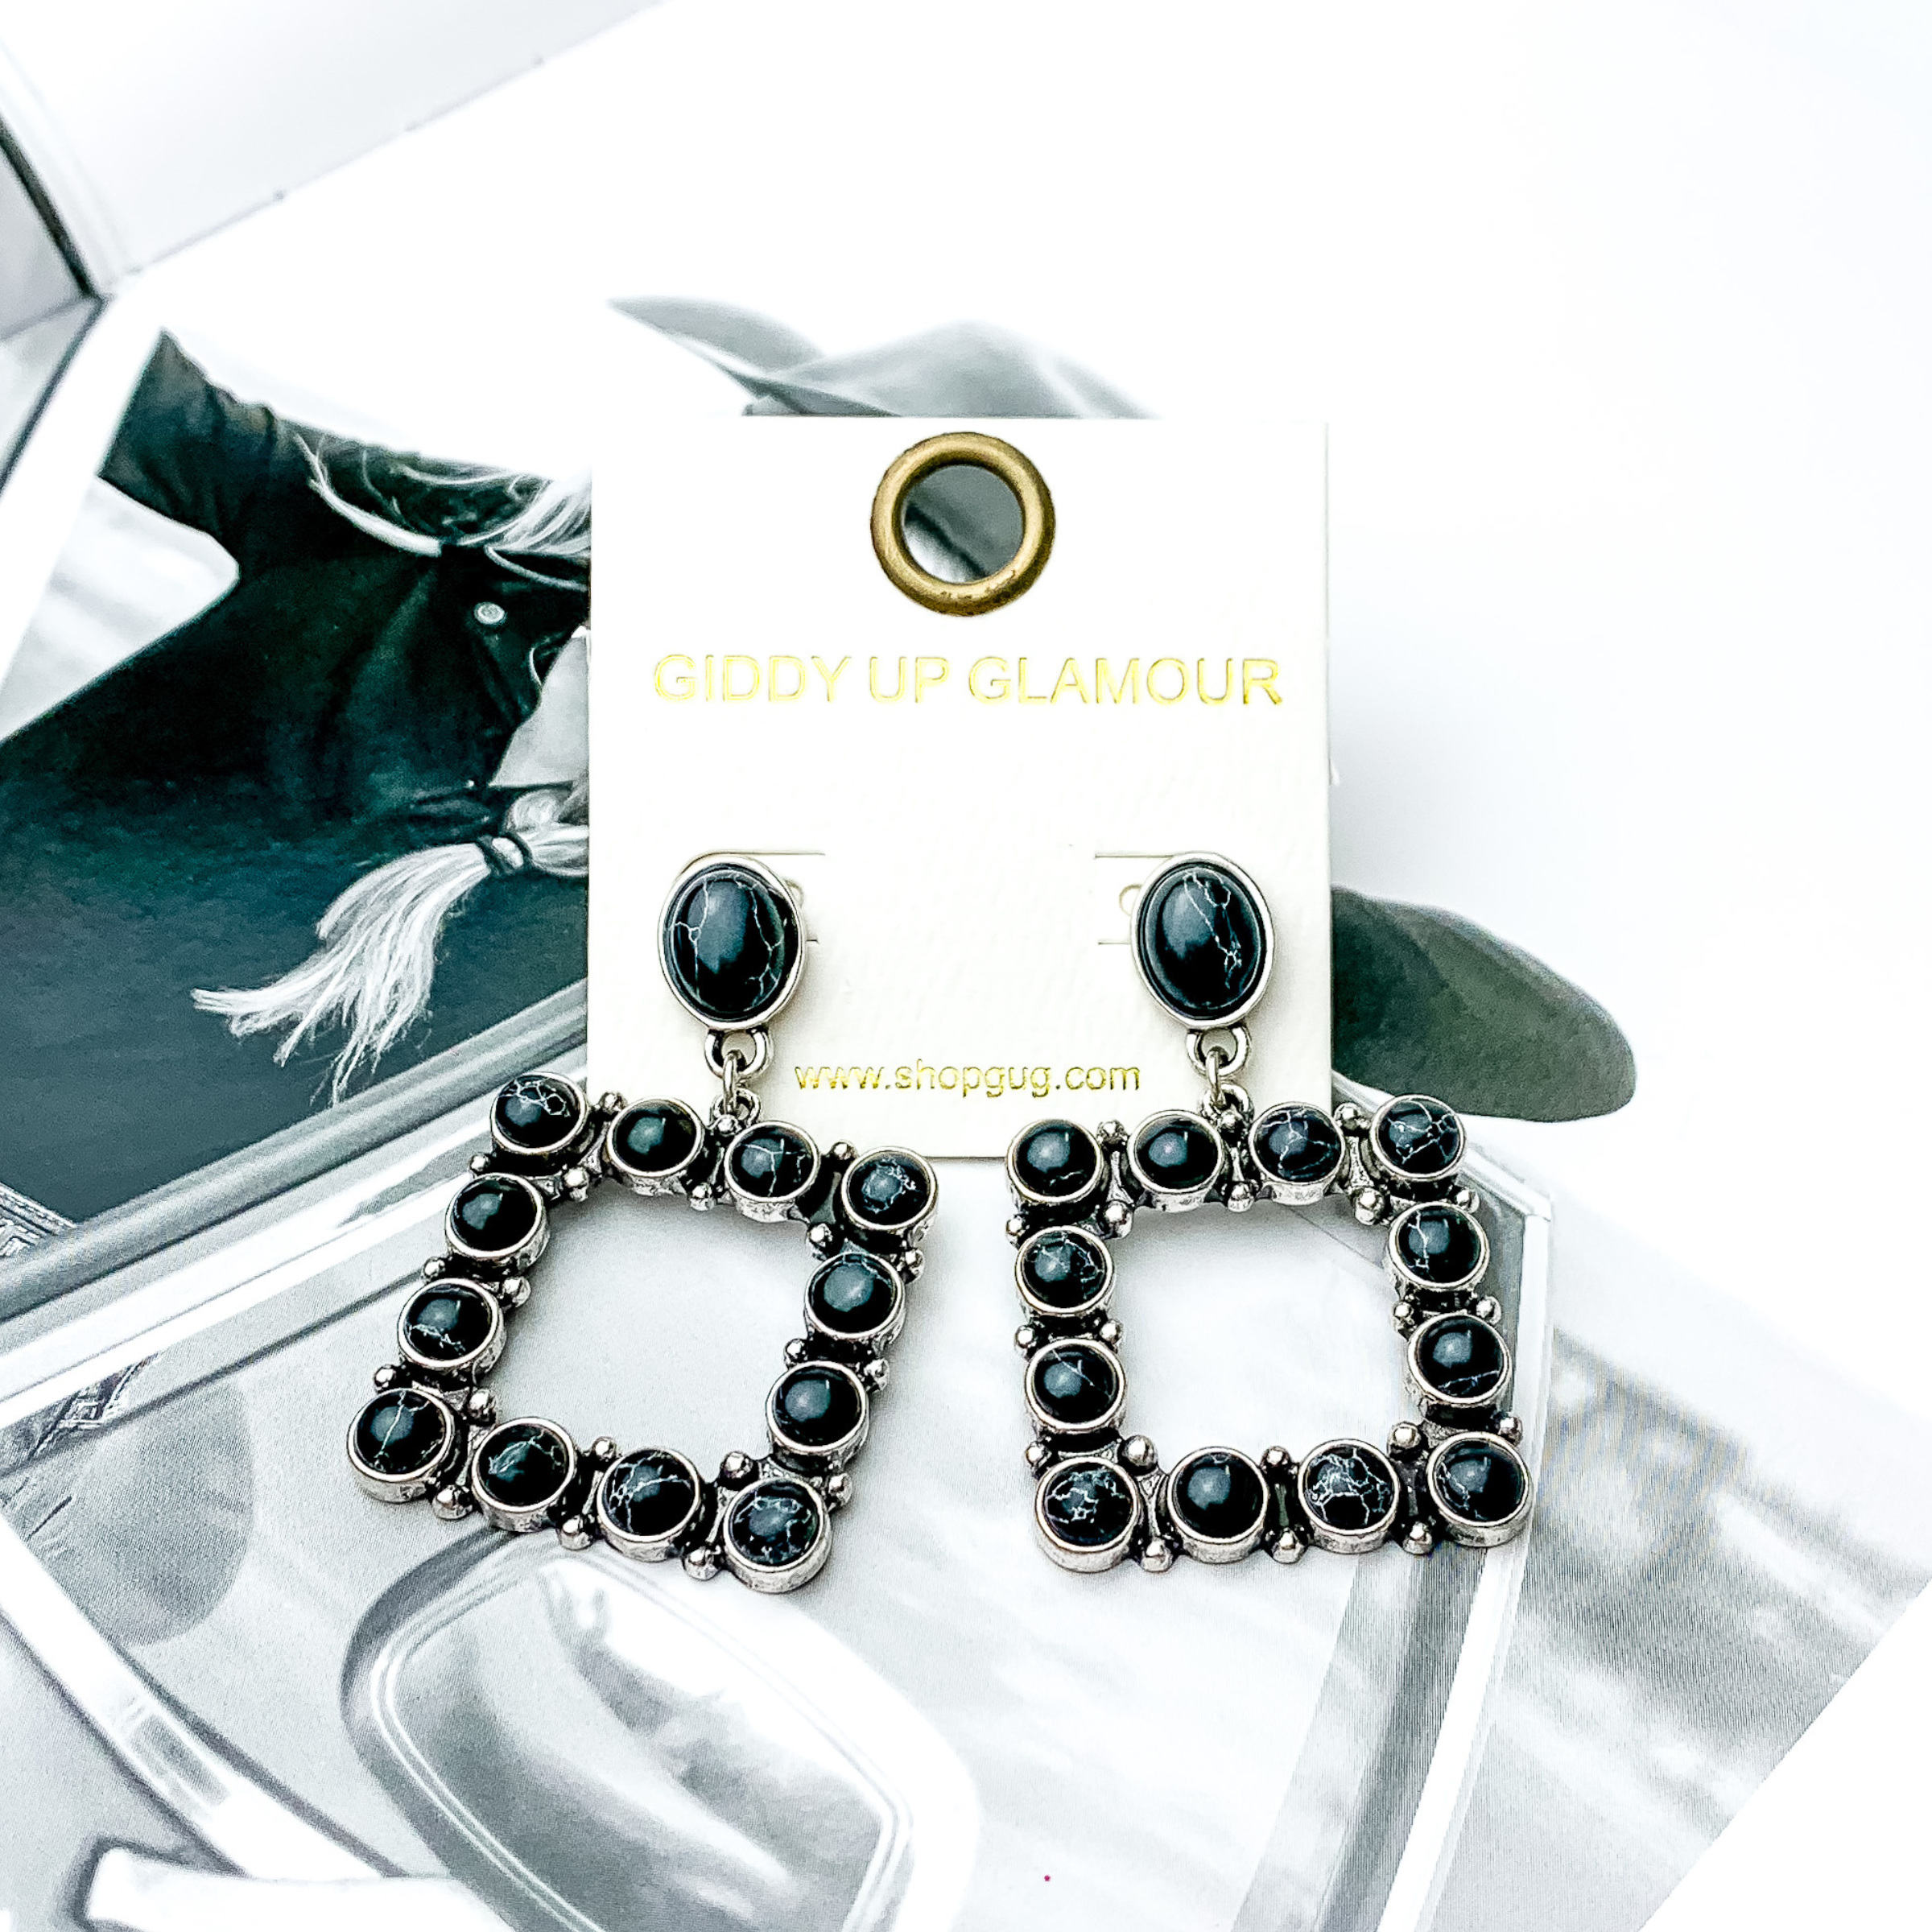 Open square drop earrings with black stones. These earrings are pictured on a black and white picture. 